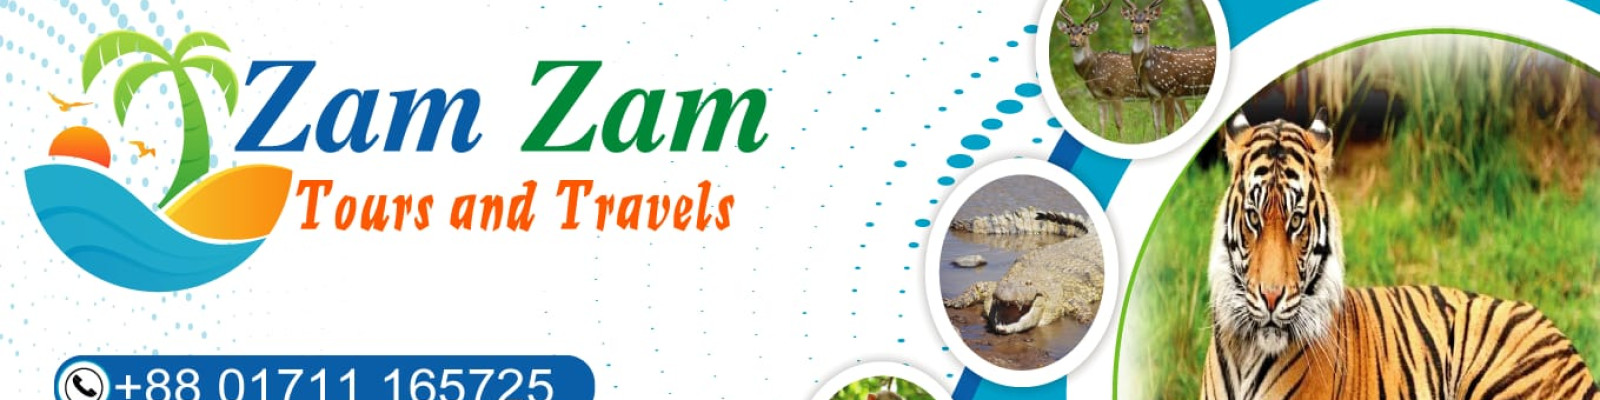 Cover image of Zam Zam Tours and Travels